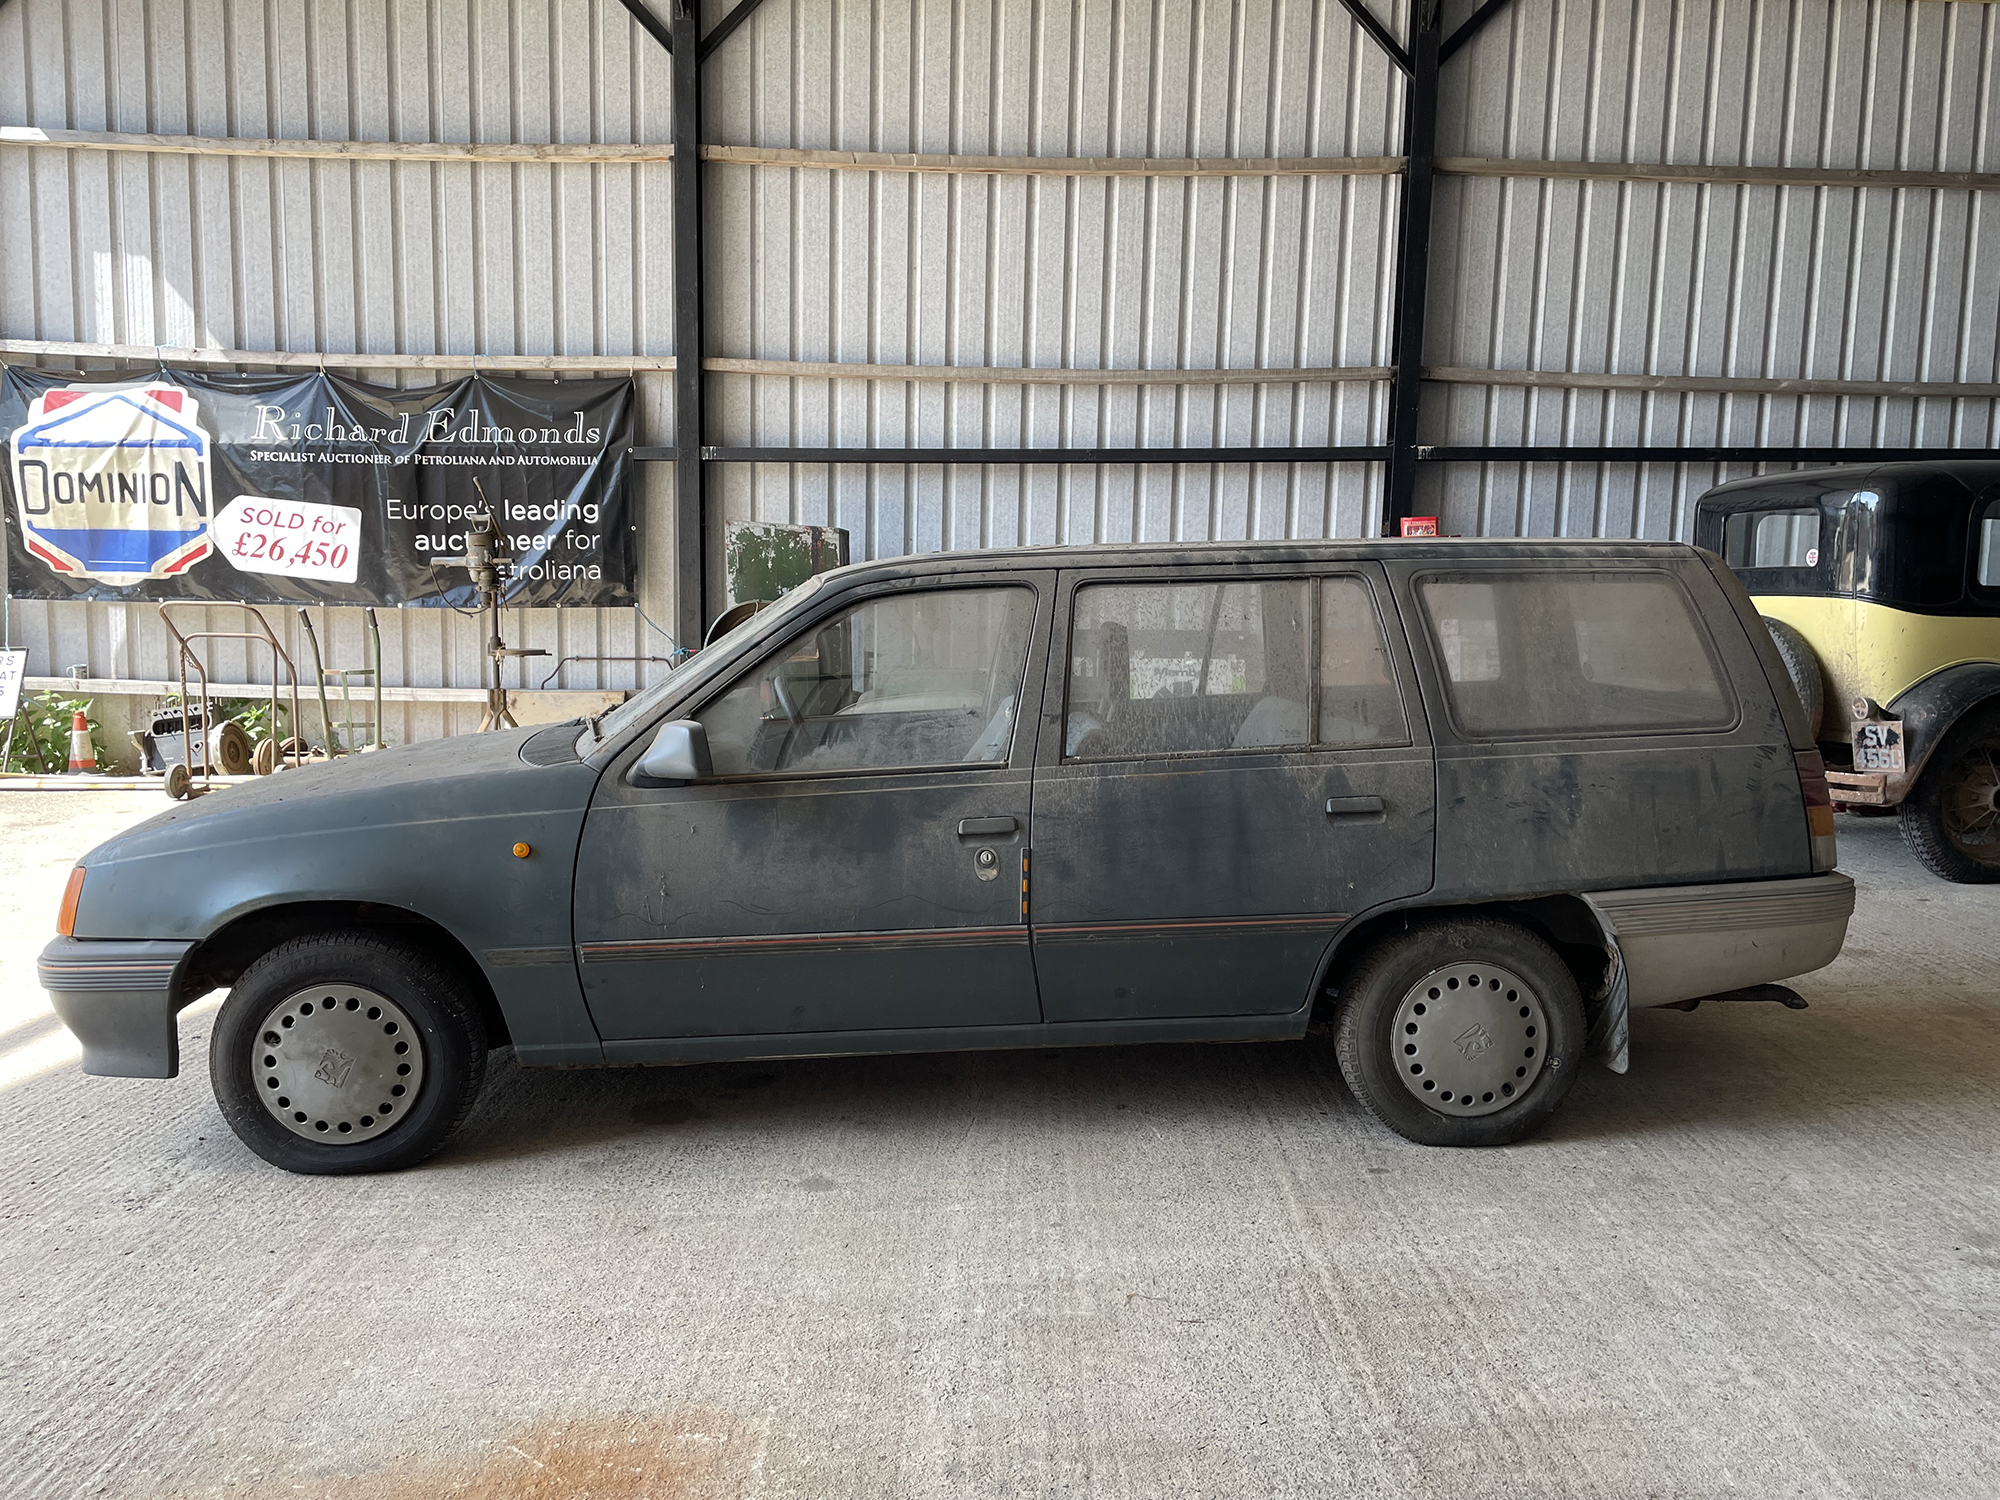 1986 Vauxhall Astra Estate Reg. no. C756 WDG Chassis no. W0L0004662557458 - Image 3 of 14